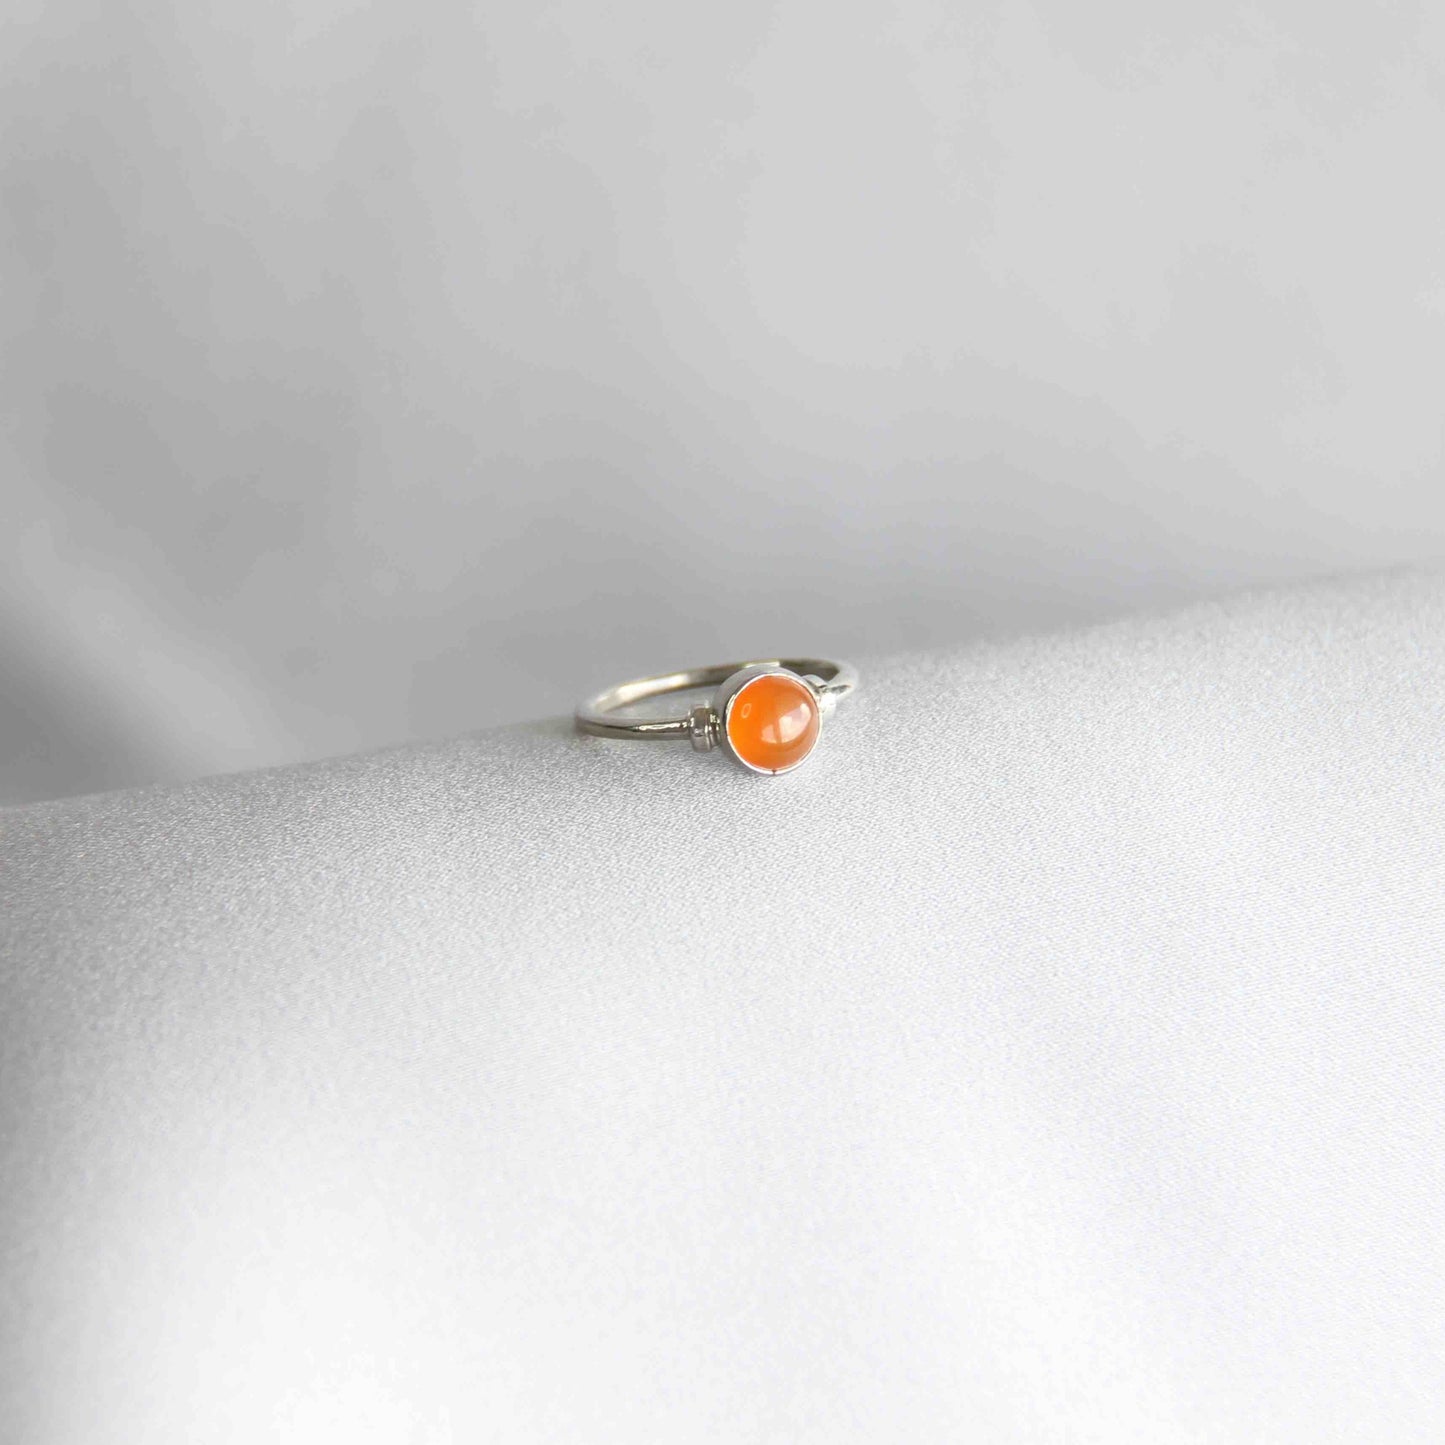 Agate Ring, Agate Jewelry, Gemstone Rings, Sterling Silver Jewelry, Silver Rings for Women